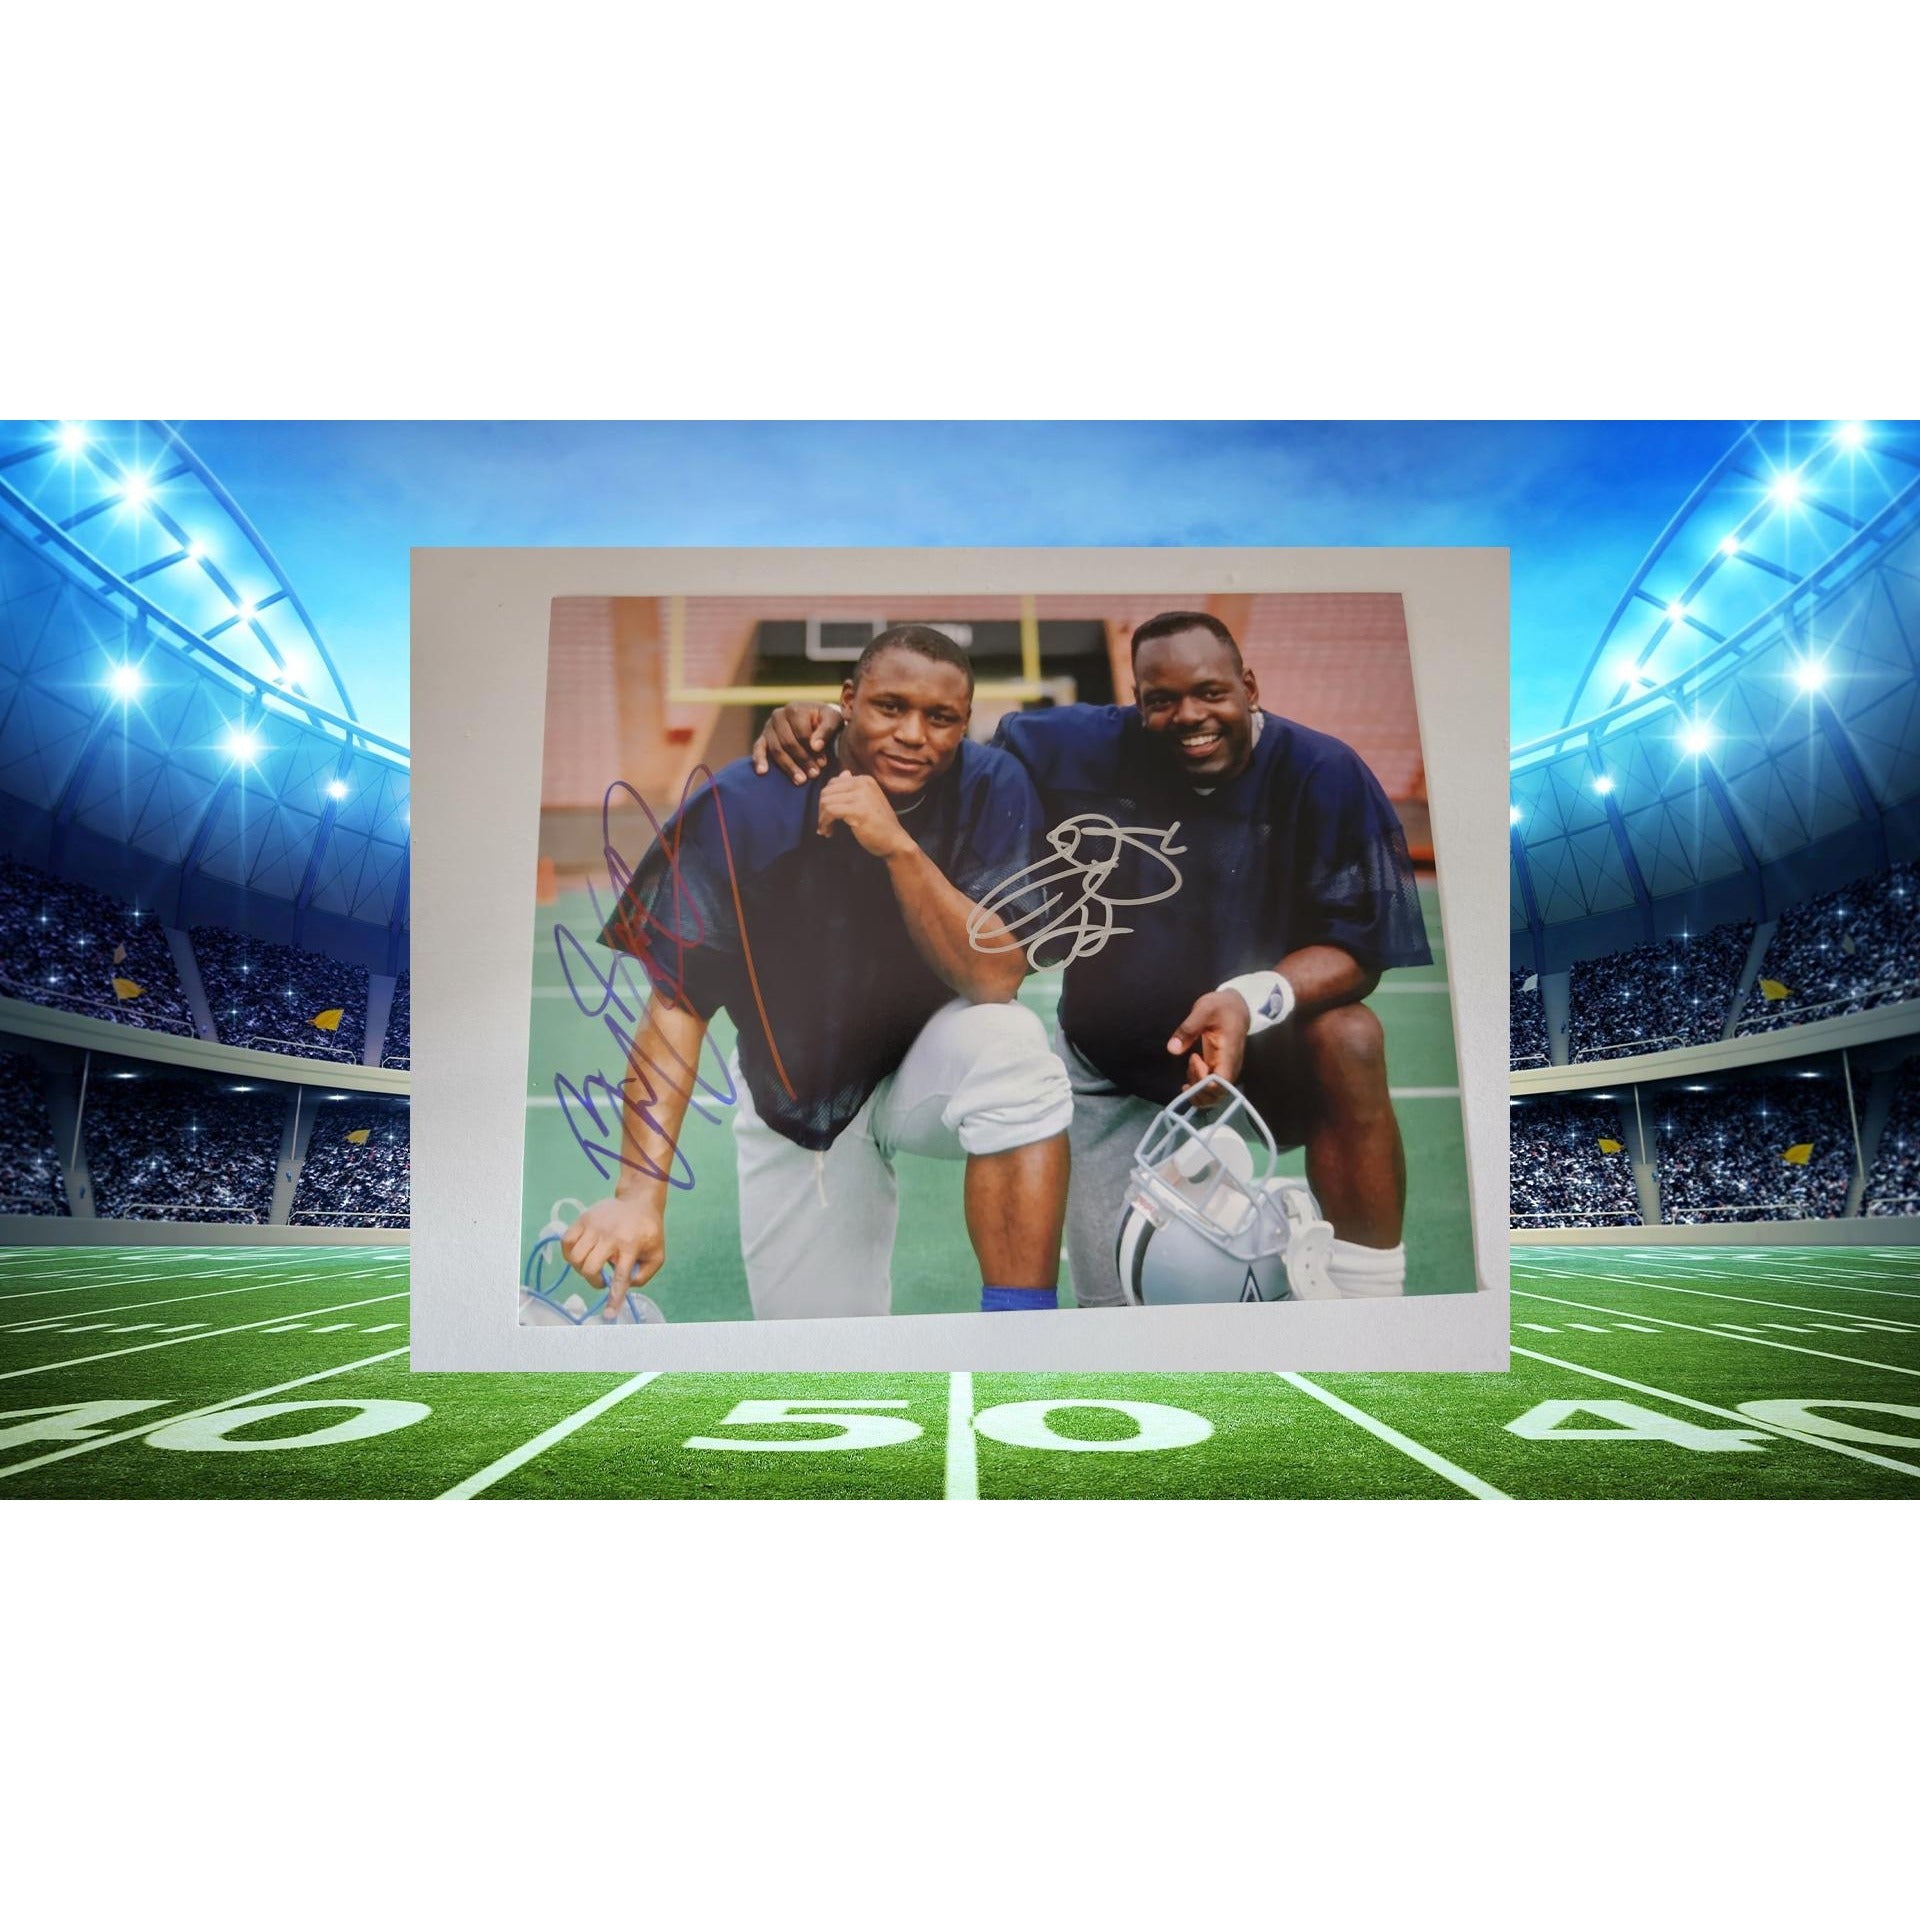 Barry Sanders and Emmitt Smith 8x10 photo signed